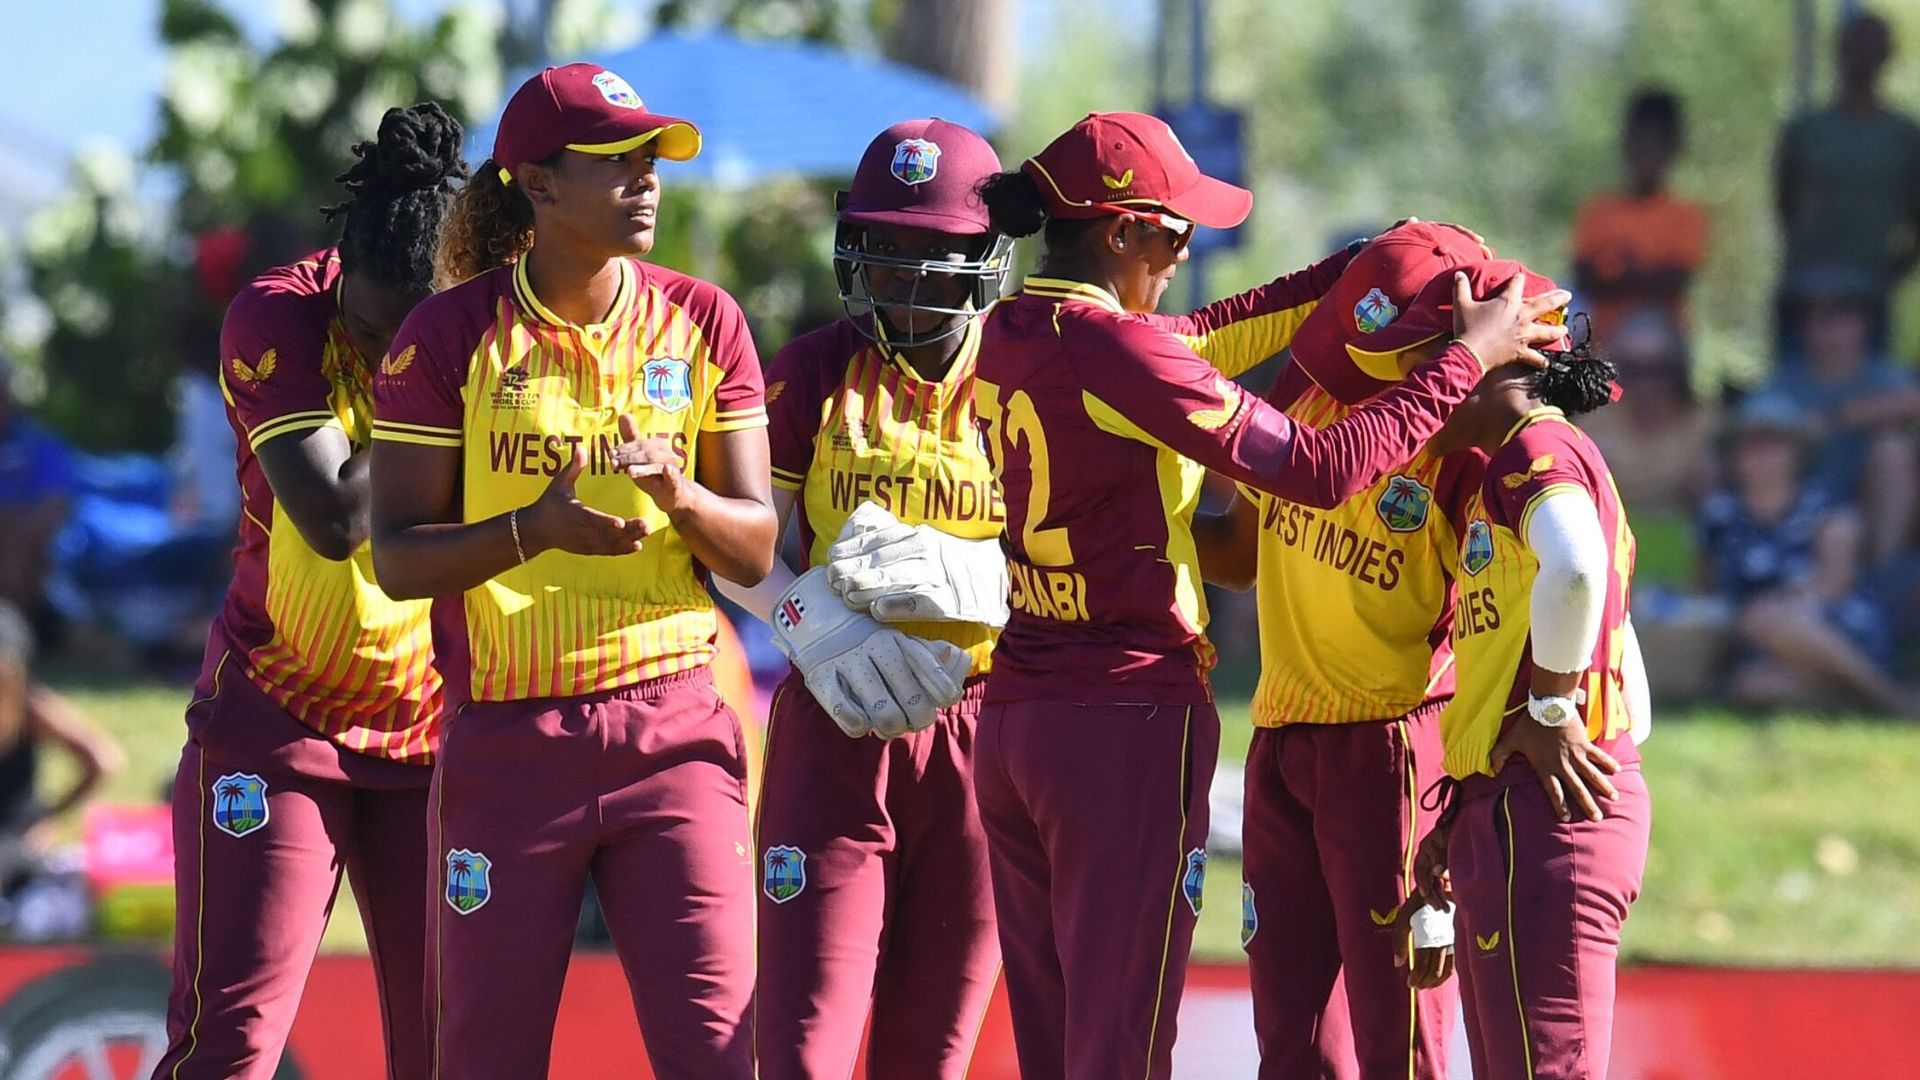 West Indies clinch close victory over Pakistan | England through to semi-finals